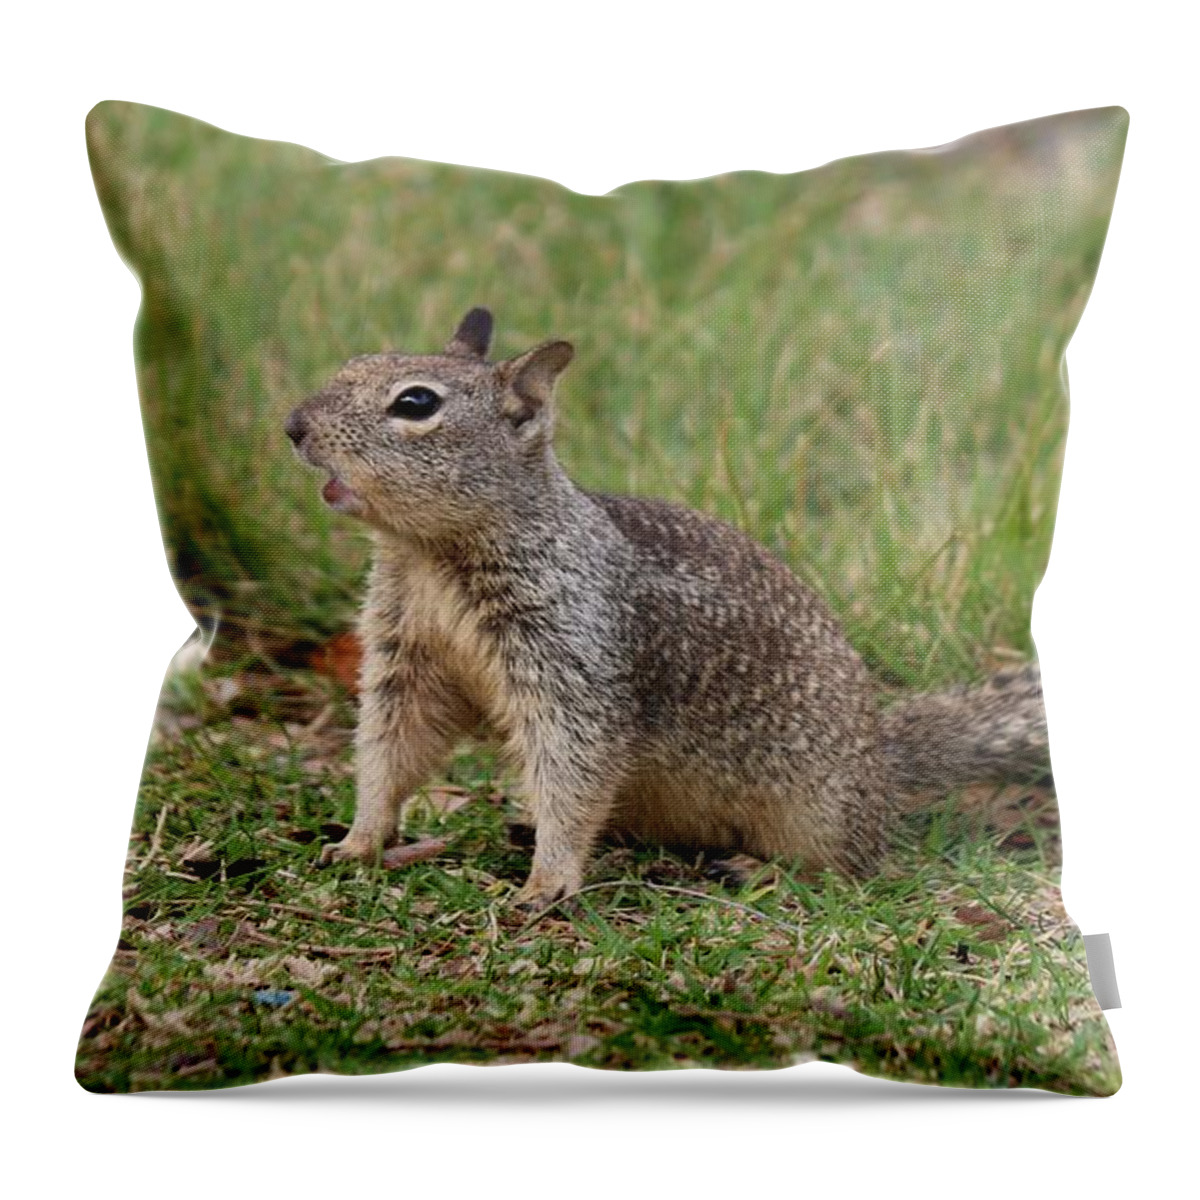 Ground Throw Pillow featuring the photograph Hey There by Christy Pooschke